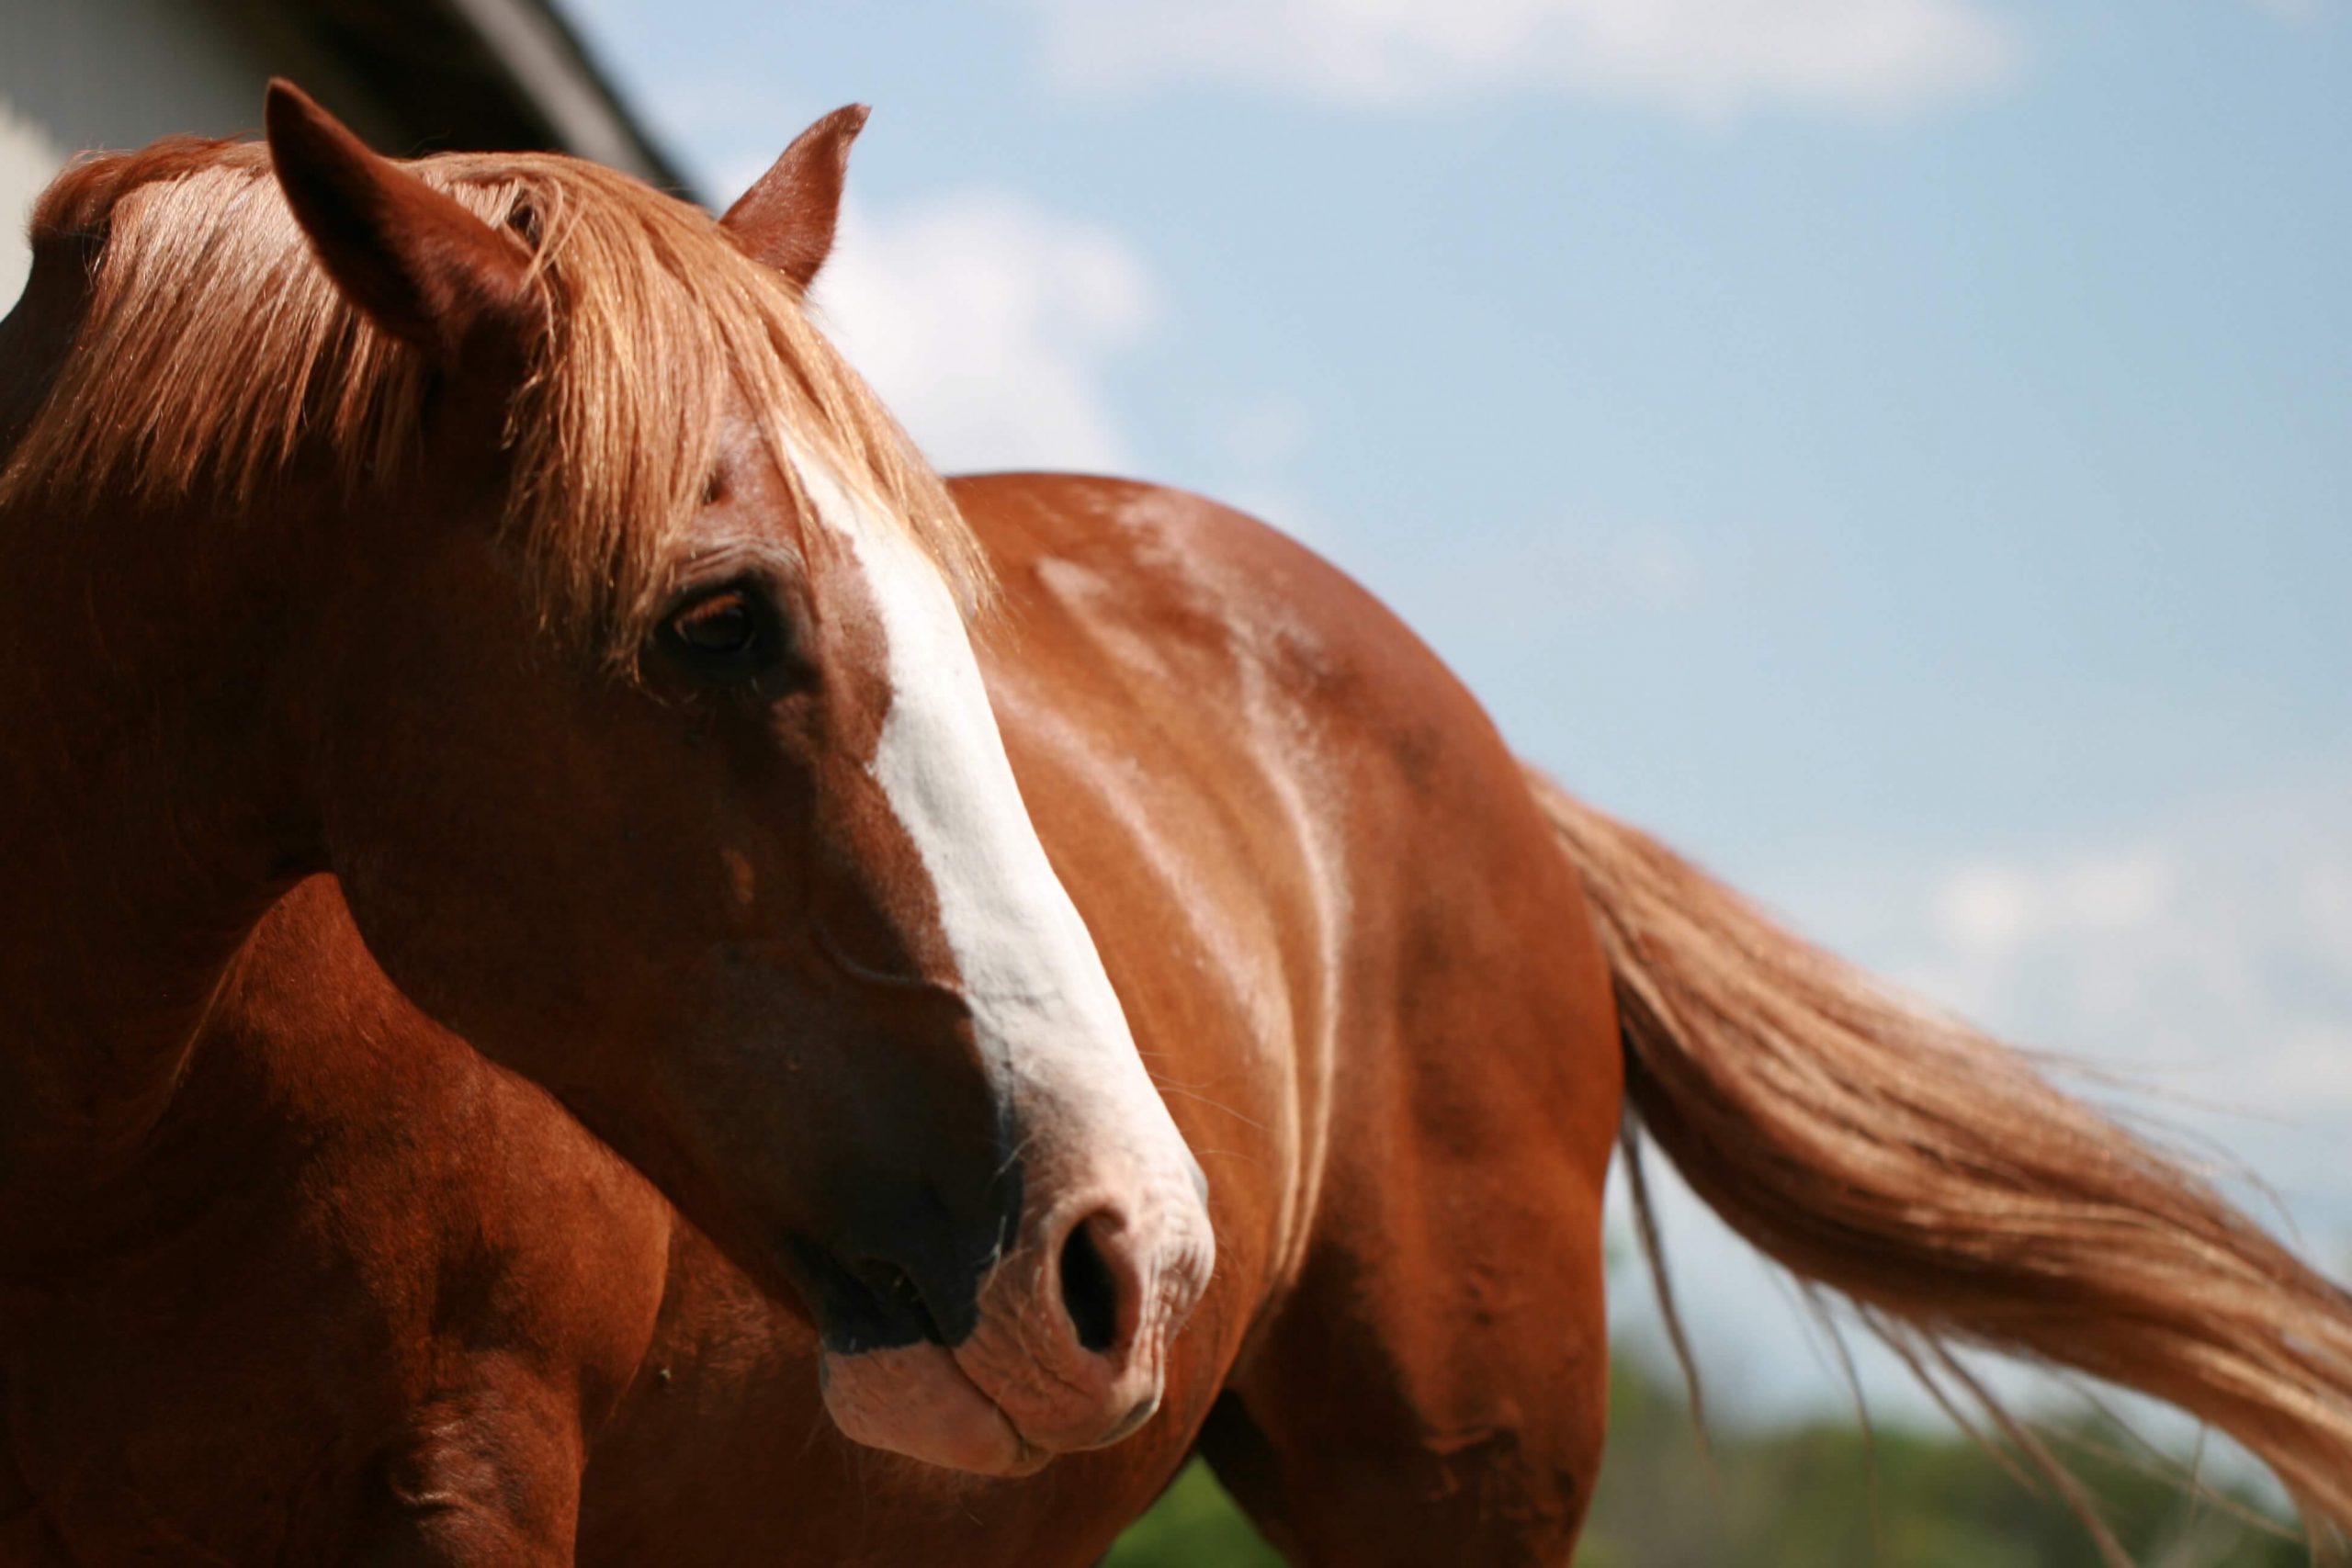  Why horses evolved to sacrifice themselves